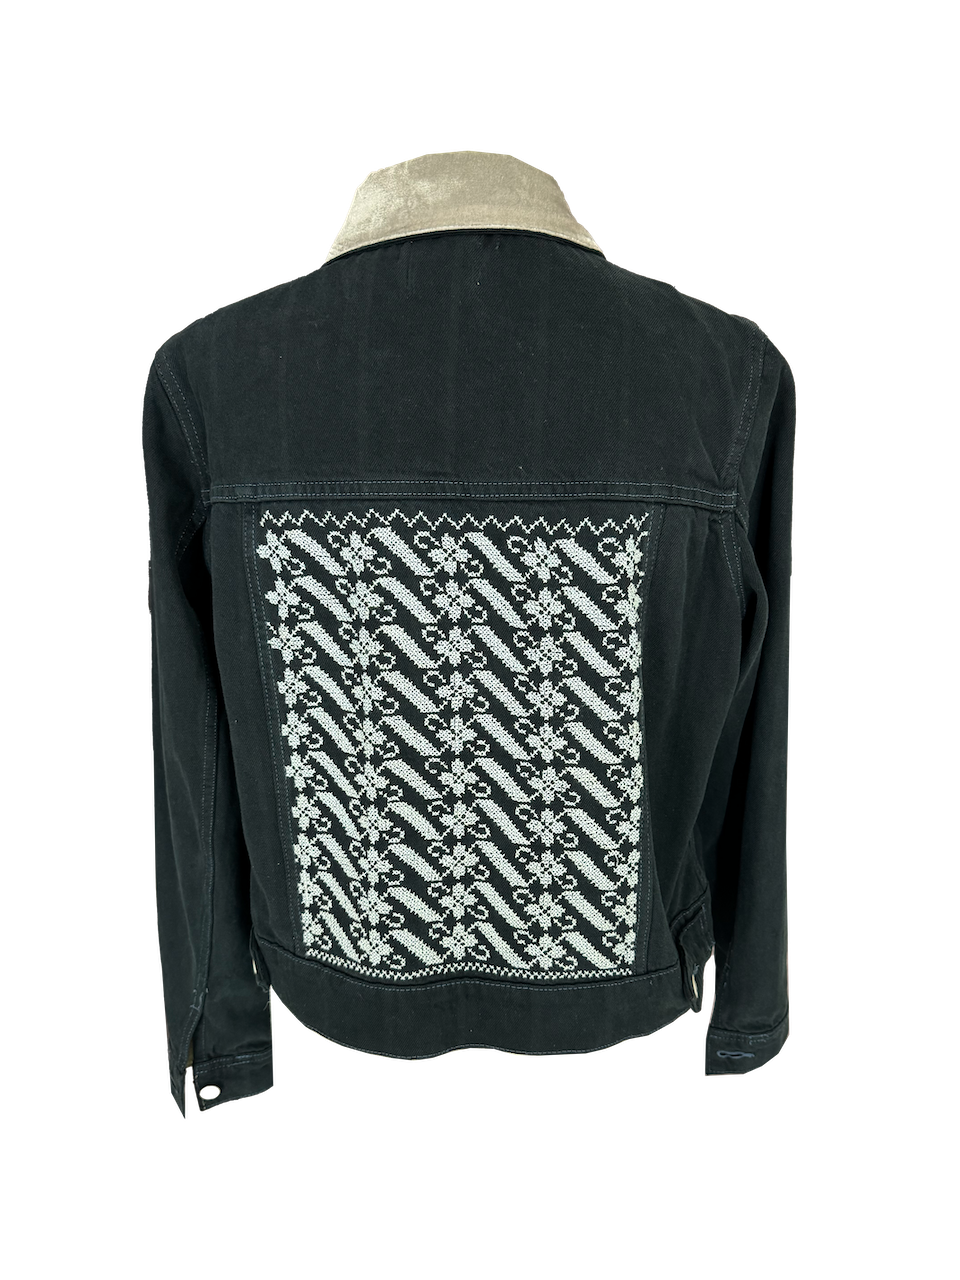 The Heavily Embroidered Denim Jacket in Black